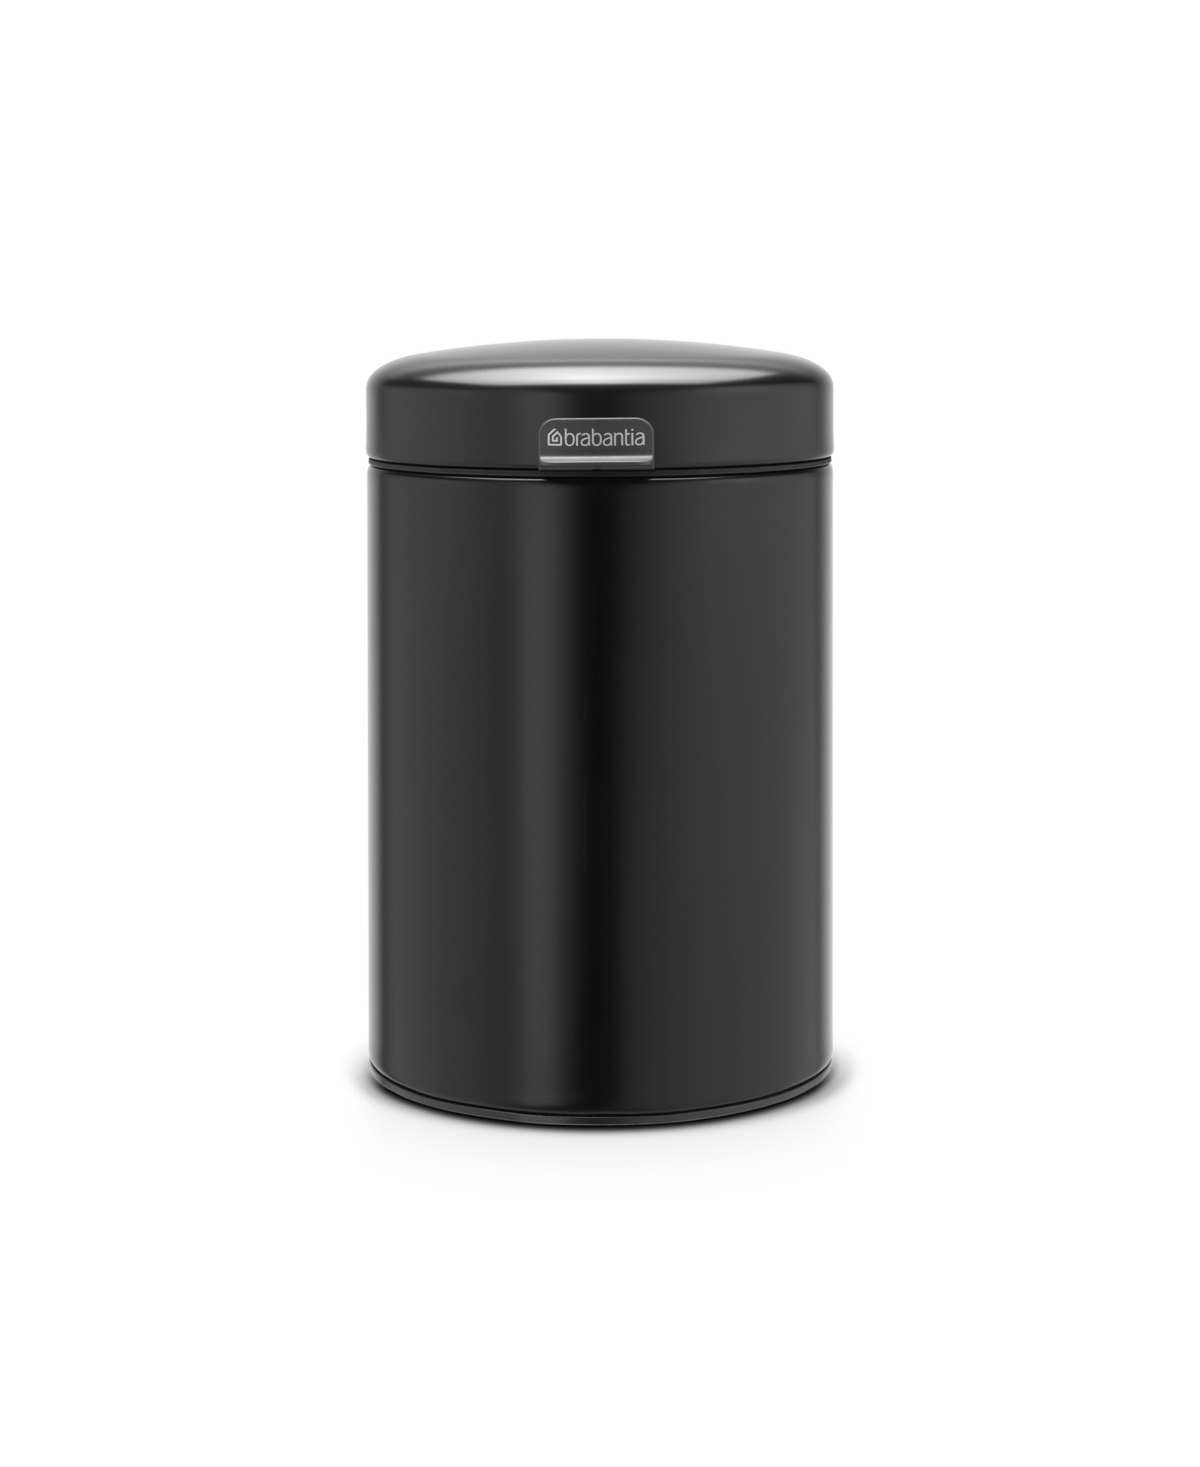 Brabantia New Icon Wall Mounted Trash Can, 0.8 Gallon, 3 Liter In Matte Black